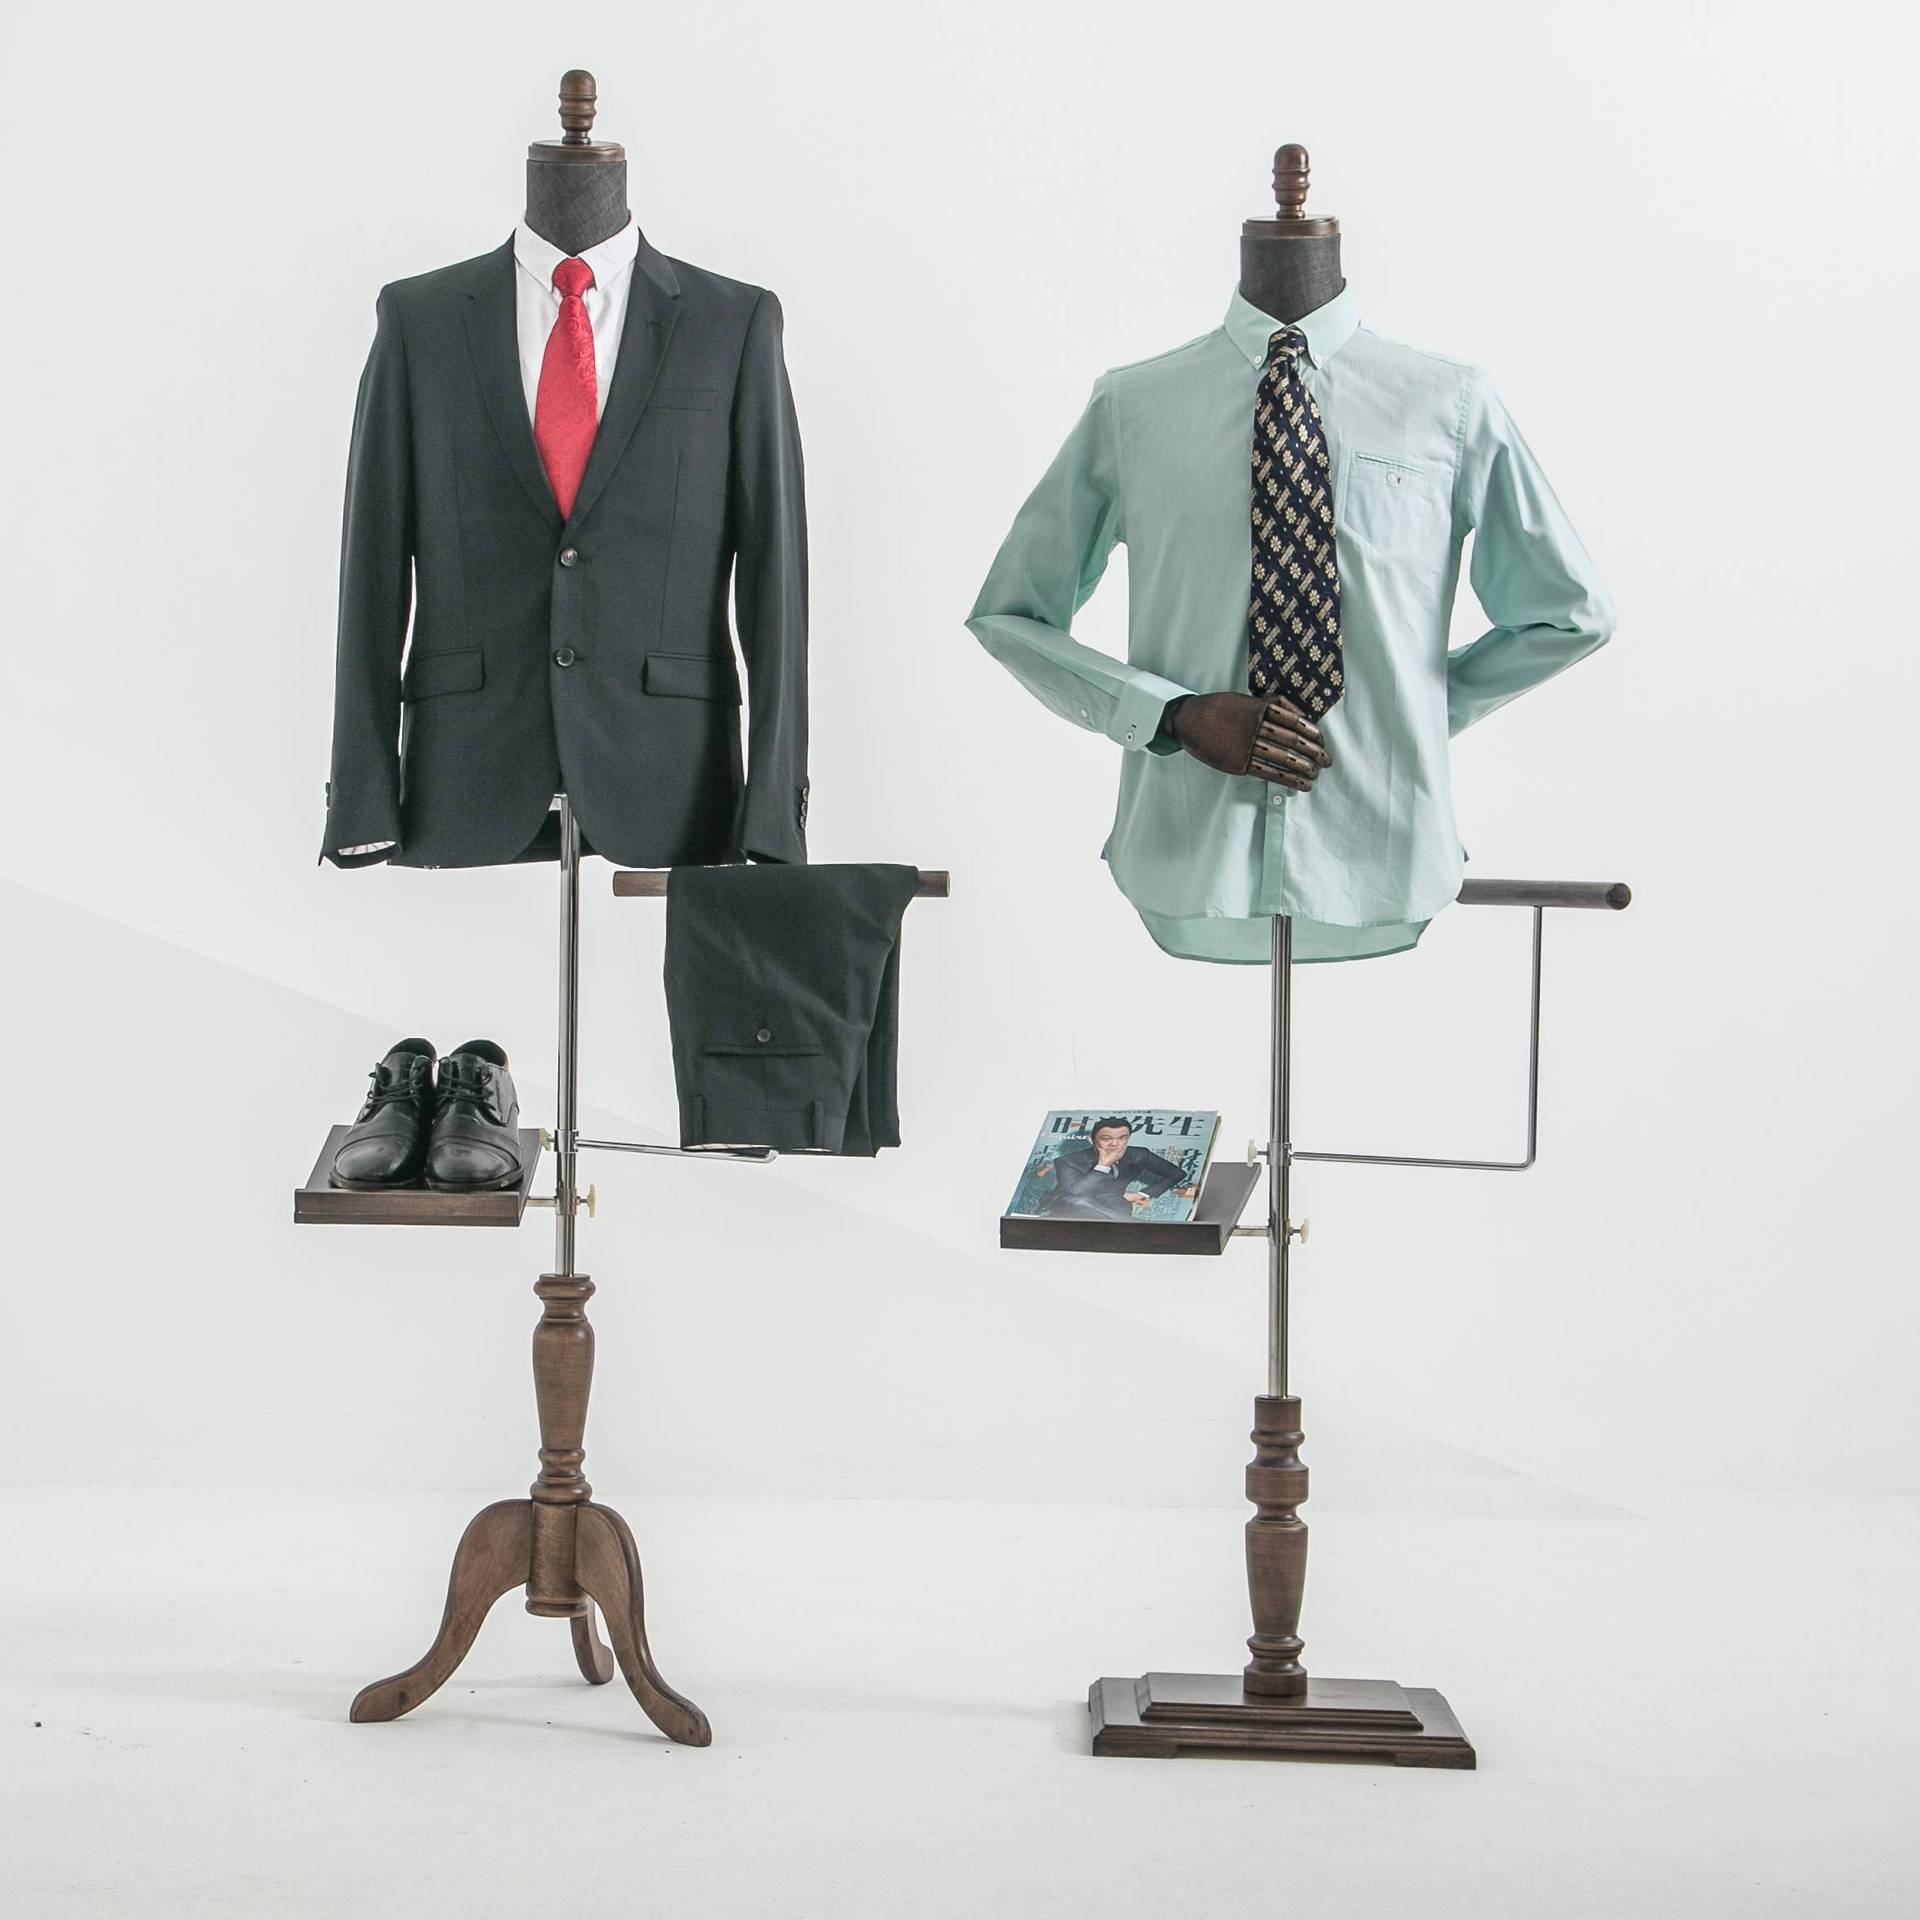 Men's Half-Length Table Model Suit Dress Display Suit Photo Mannequin Clothing Store Window Showcase Display Props